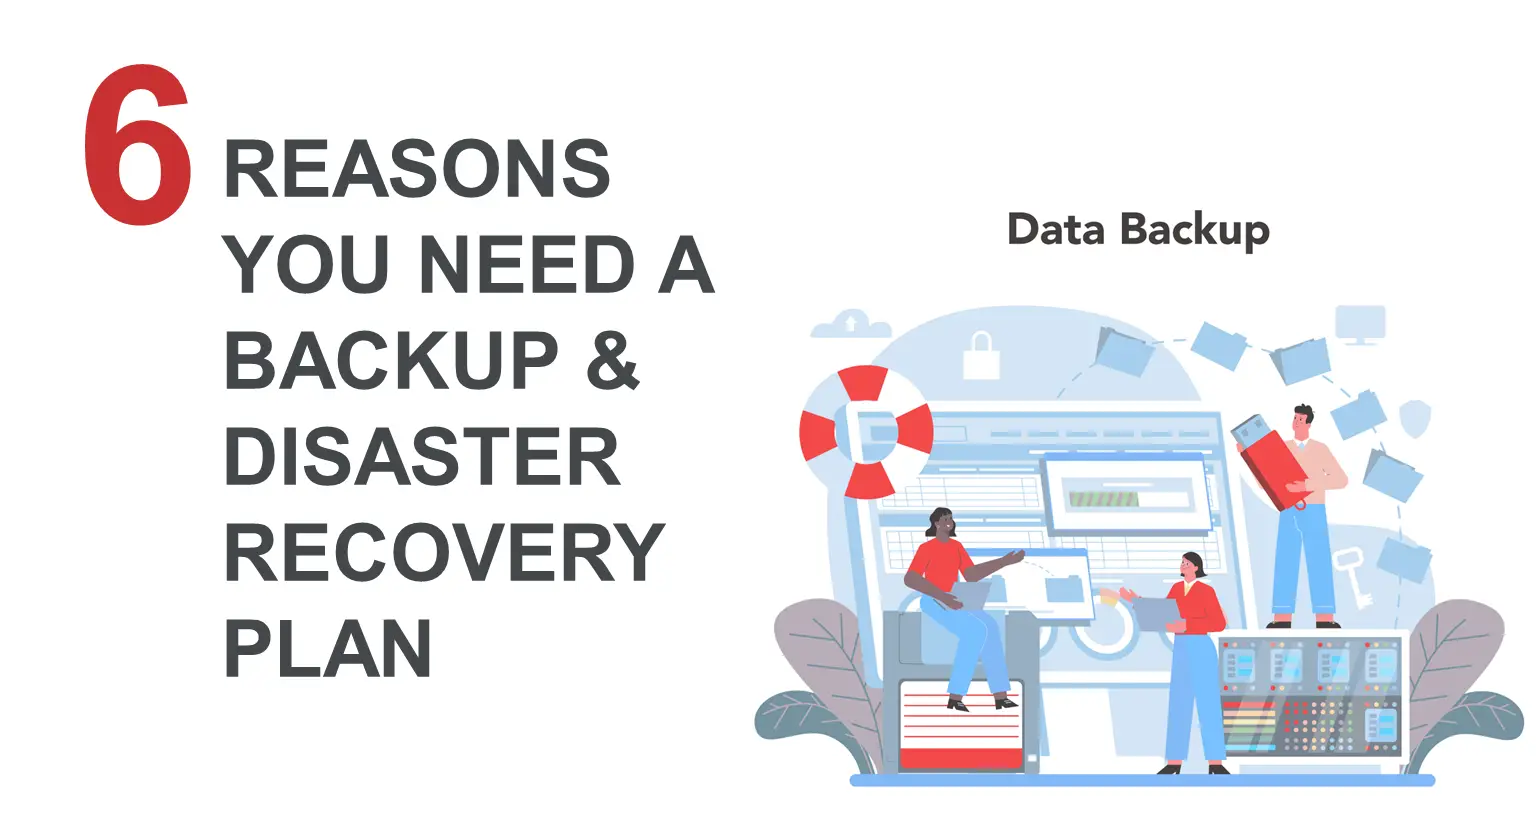 6 Reasons You Need A Backup And Disaster Recovery Plan